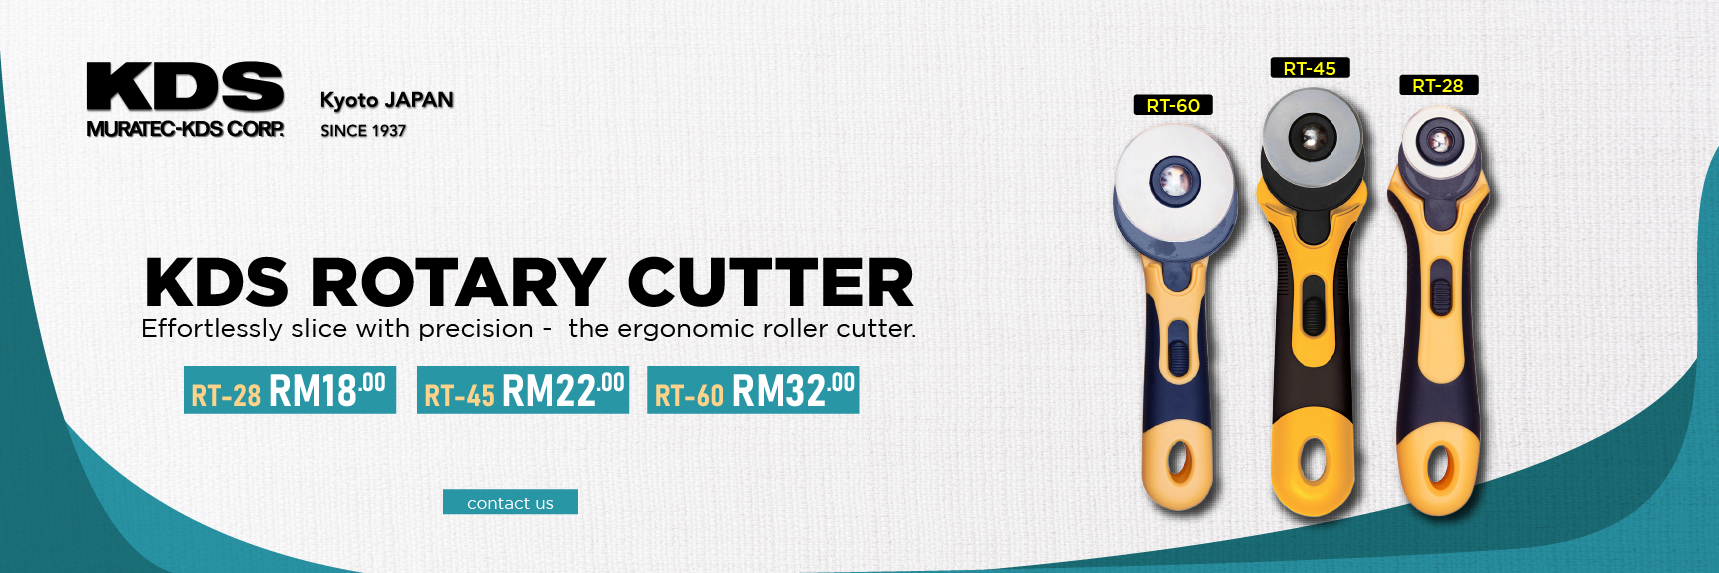 KDS ROTARY CUTTER-01